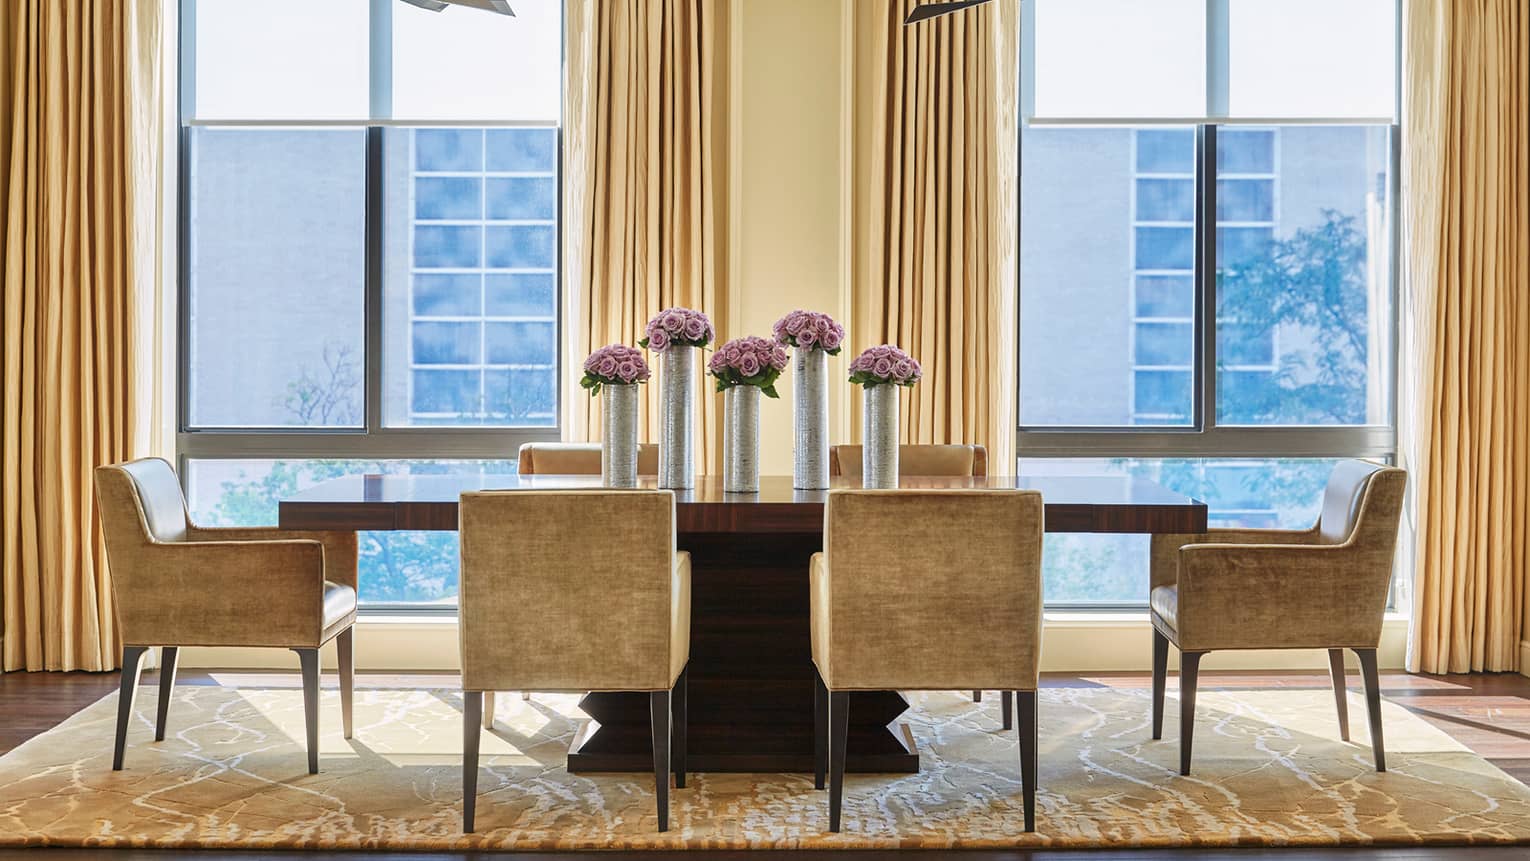 Imperial Suite modern dining table with golden brown velvet dining chairs around long wood table with tall silver vases, purple flowers